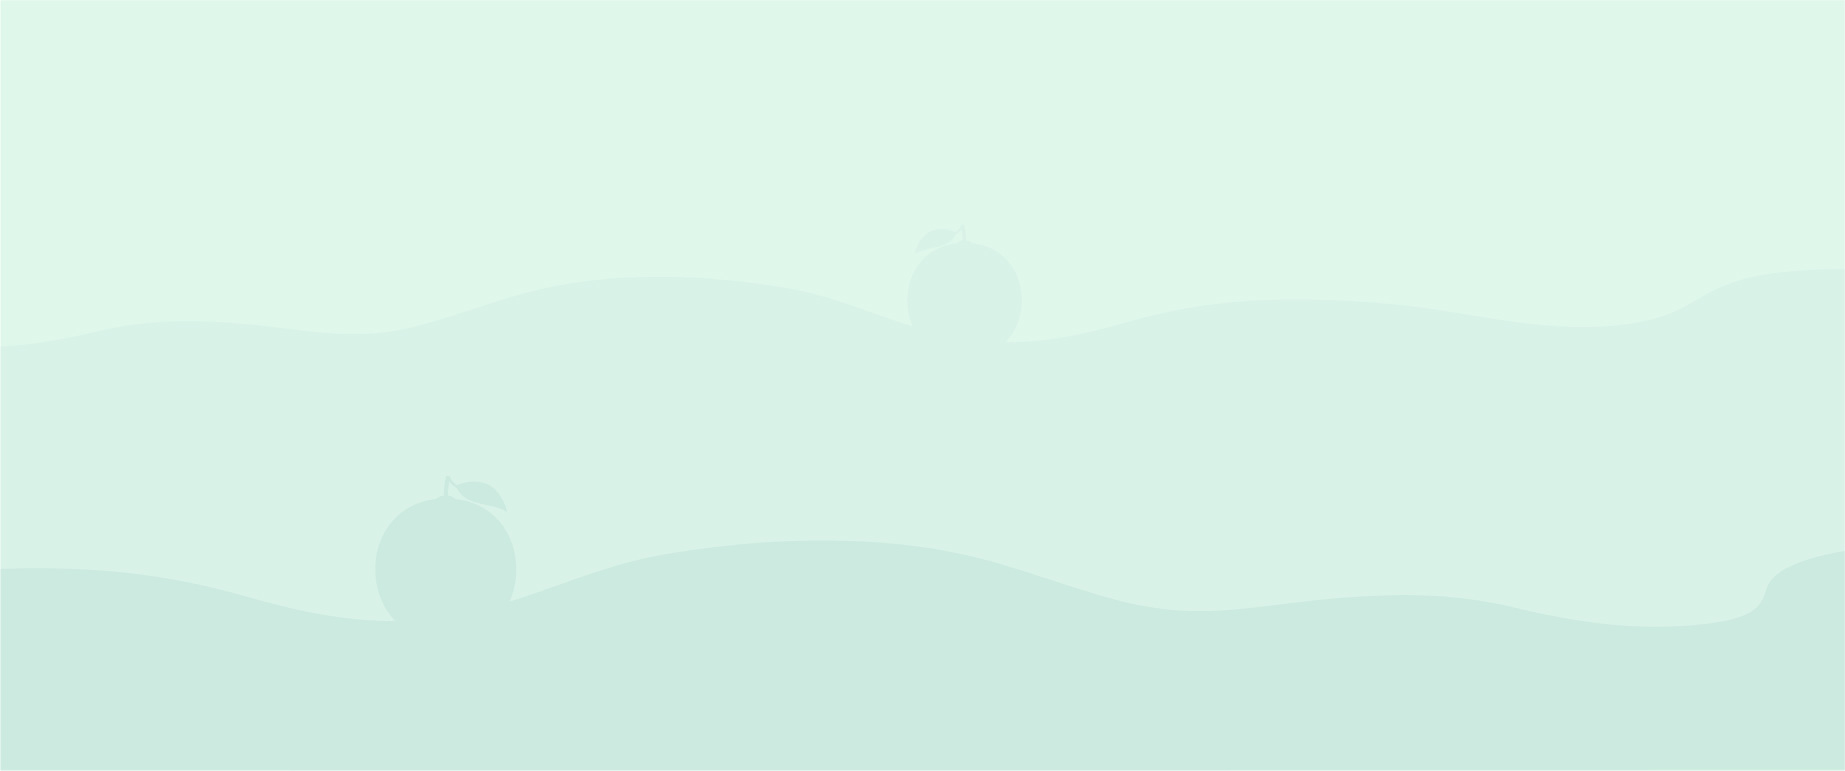 background with misty waves and fruit silhouettes